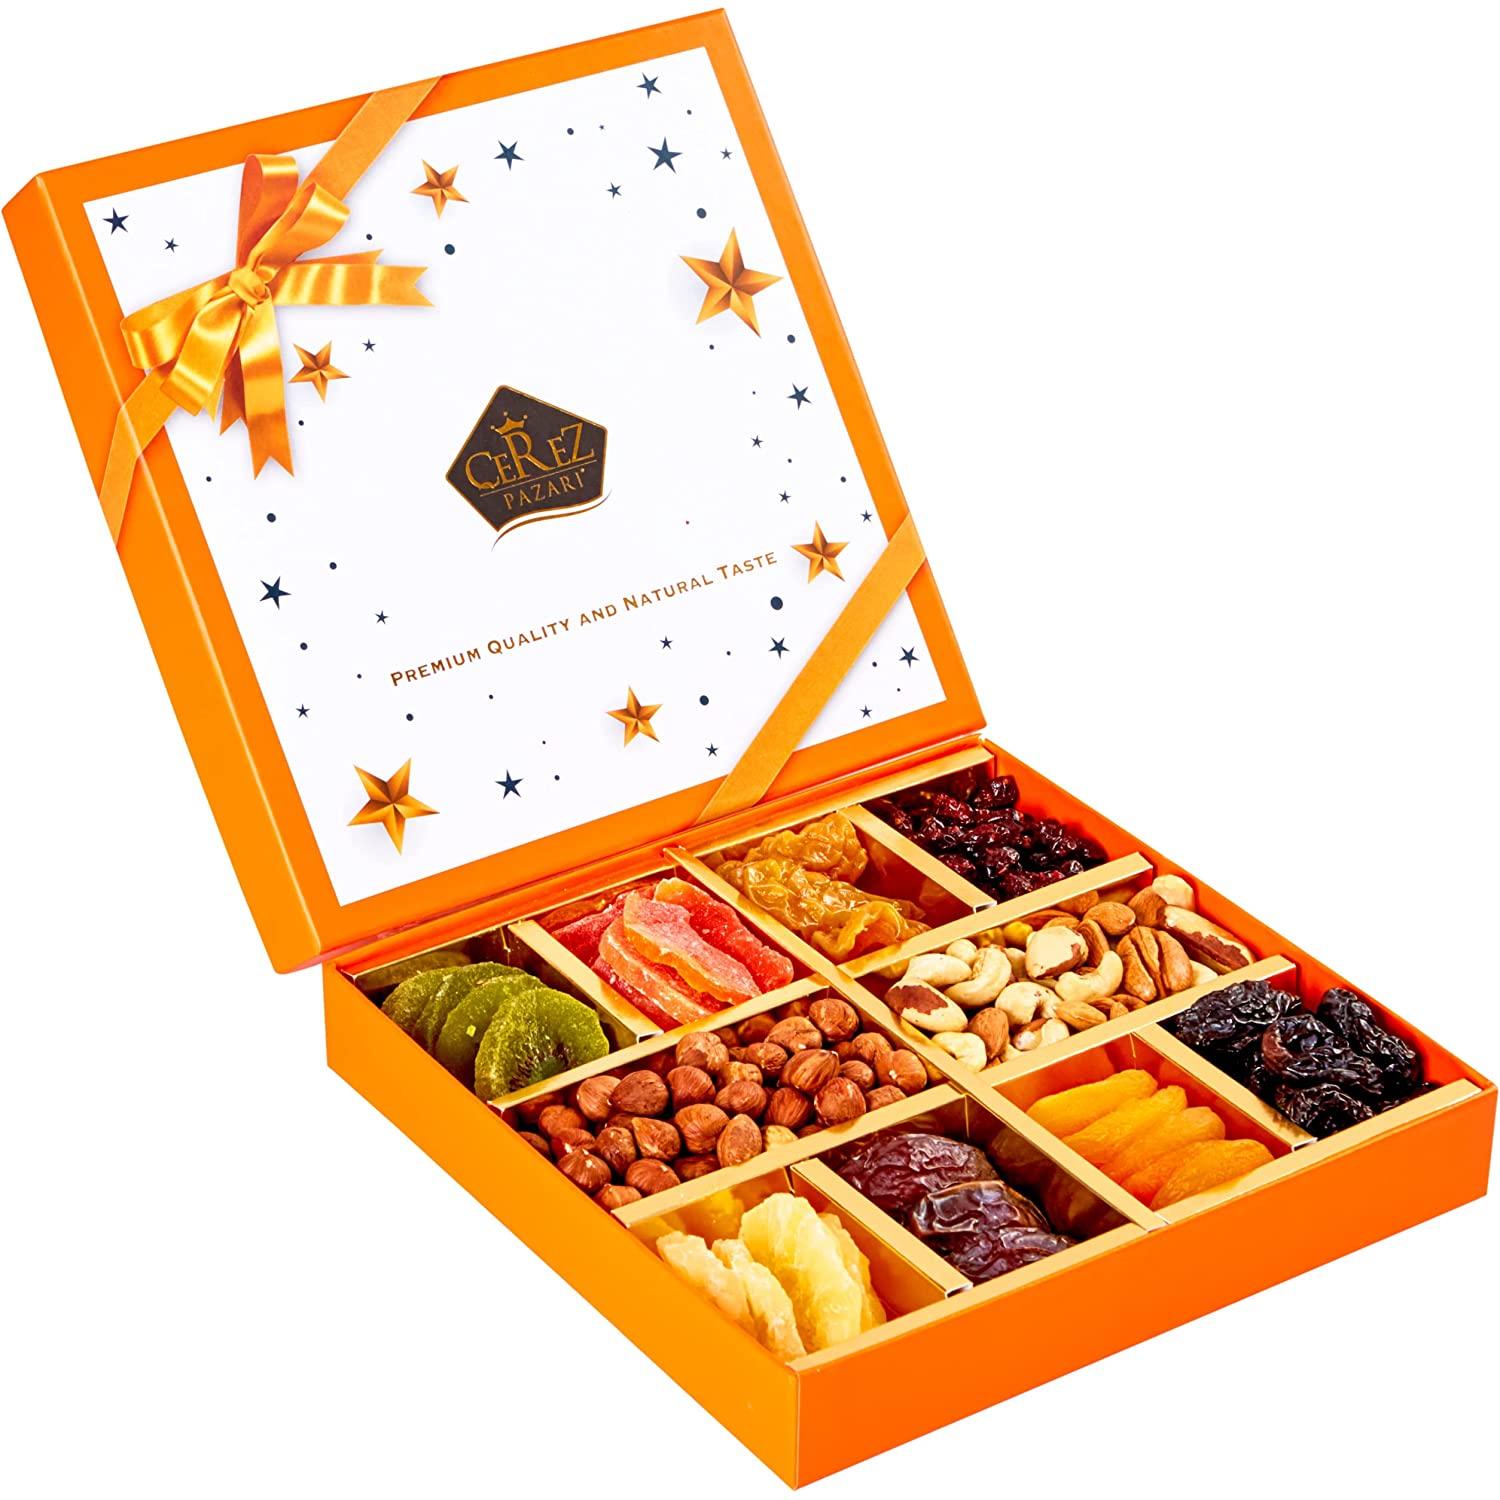 Leather Bound Dry Fruit Box - Idea Corporate Gifts Online | Gifts  Manufacturers & Suppliers Delhi Mumbai Chennai India